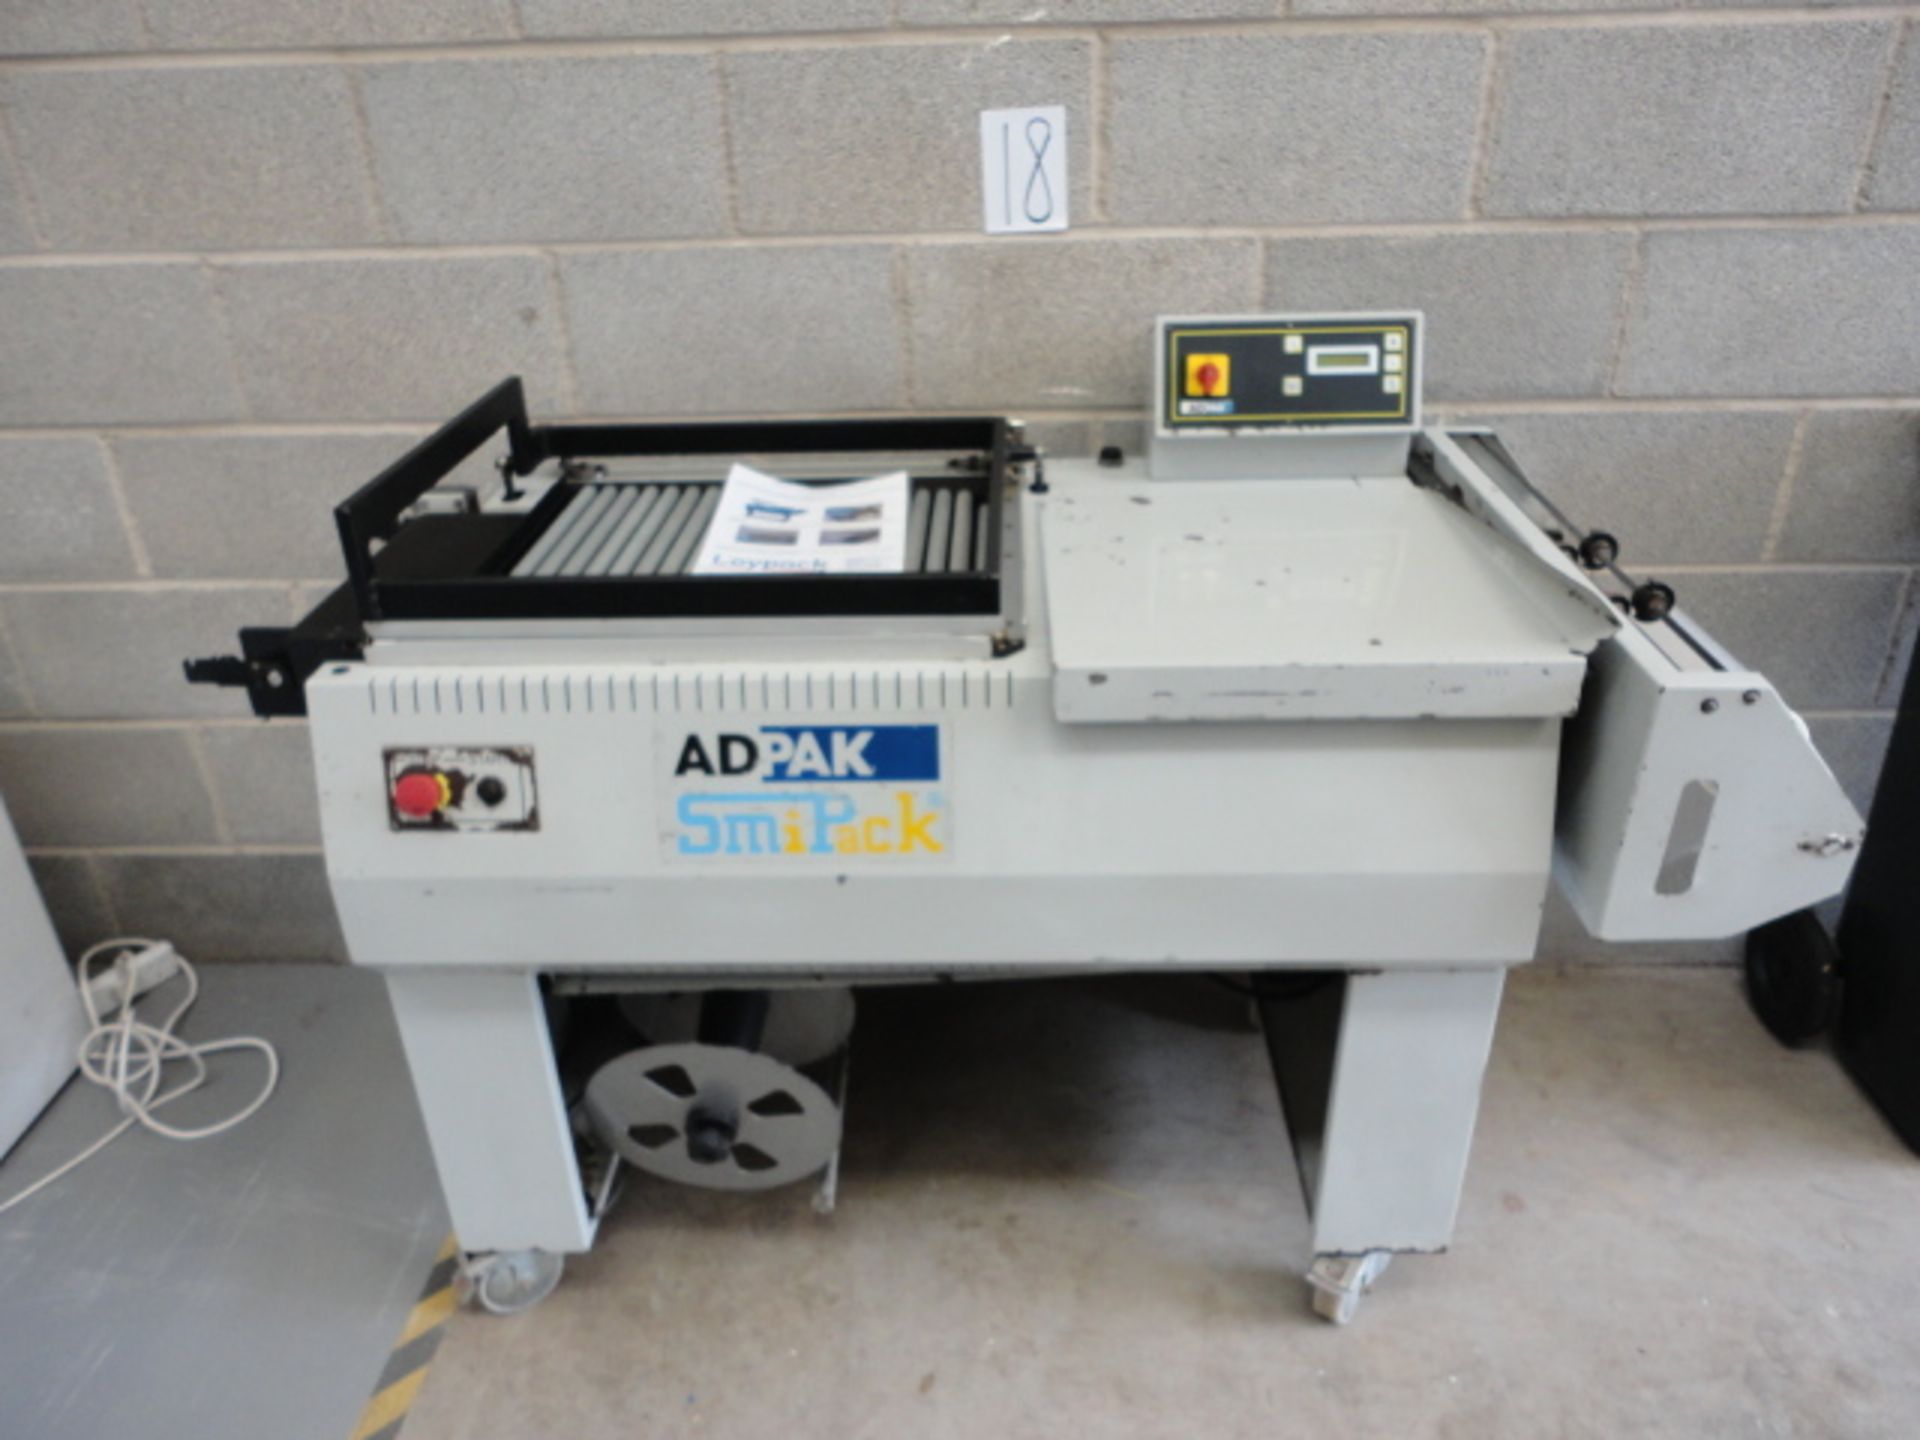 ADPAK L sealerLIFT OUT £20